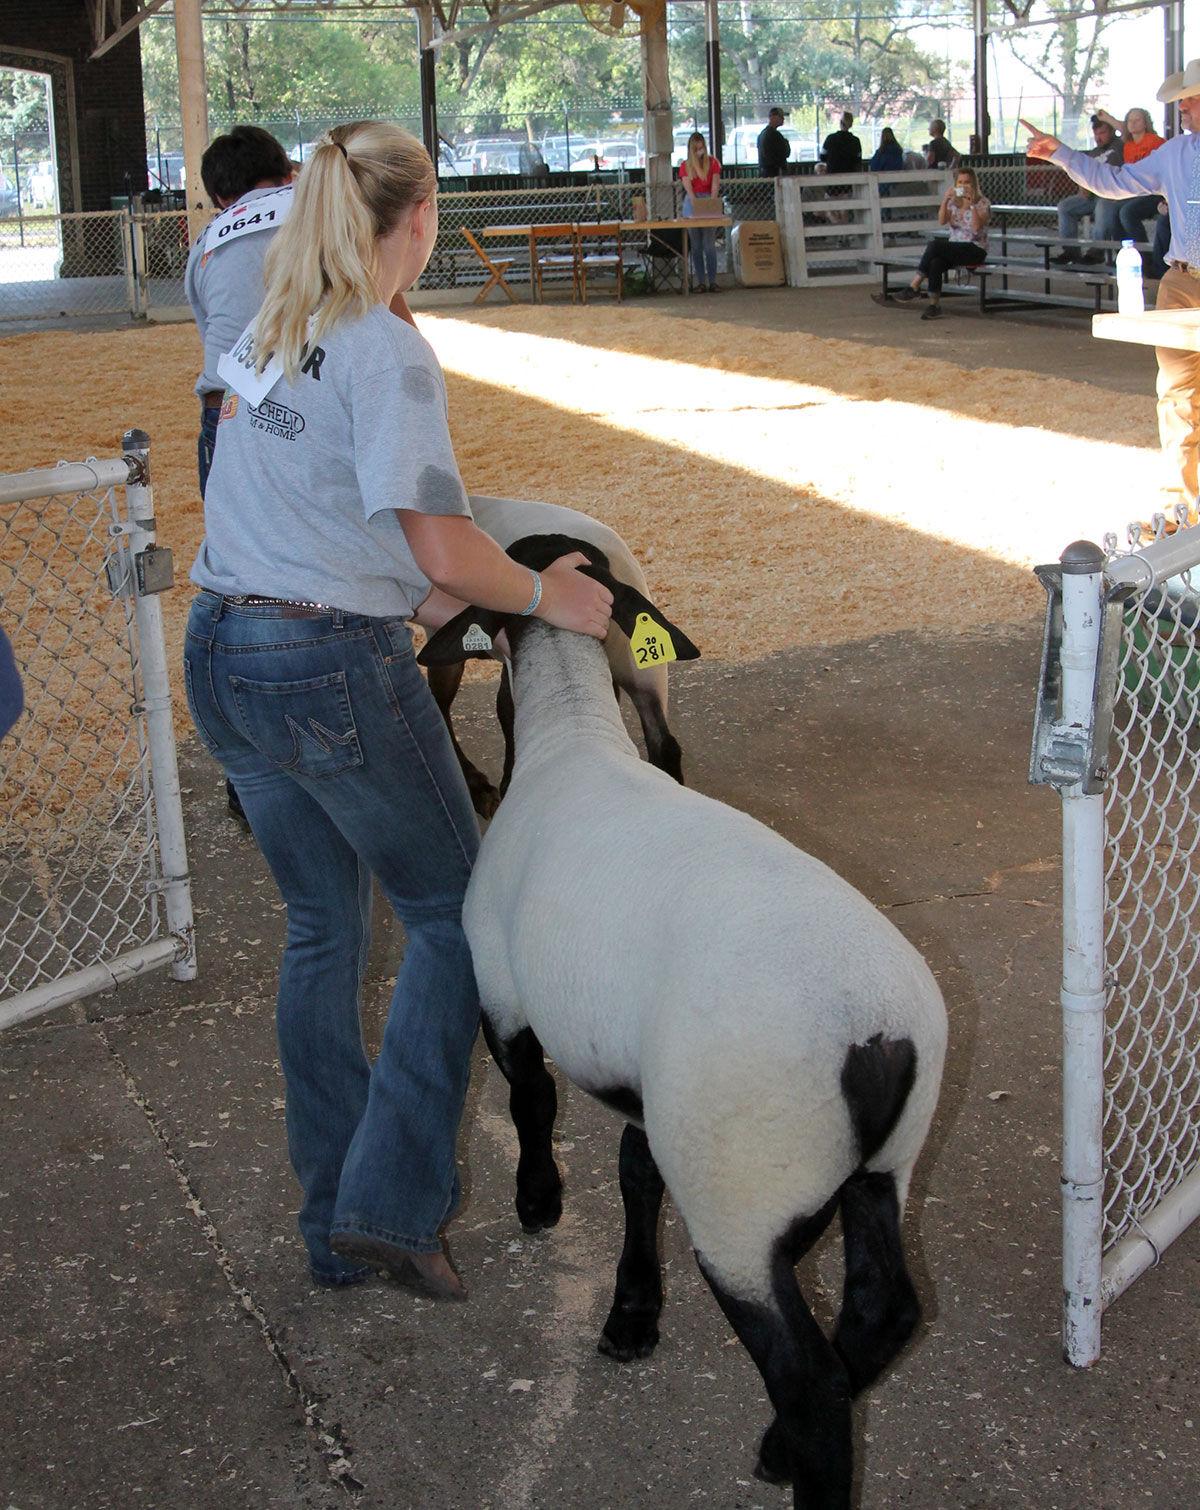 Iowa State Fair livestock show goes on — without crowds Livestock